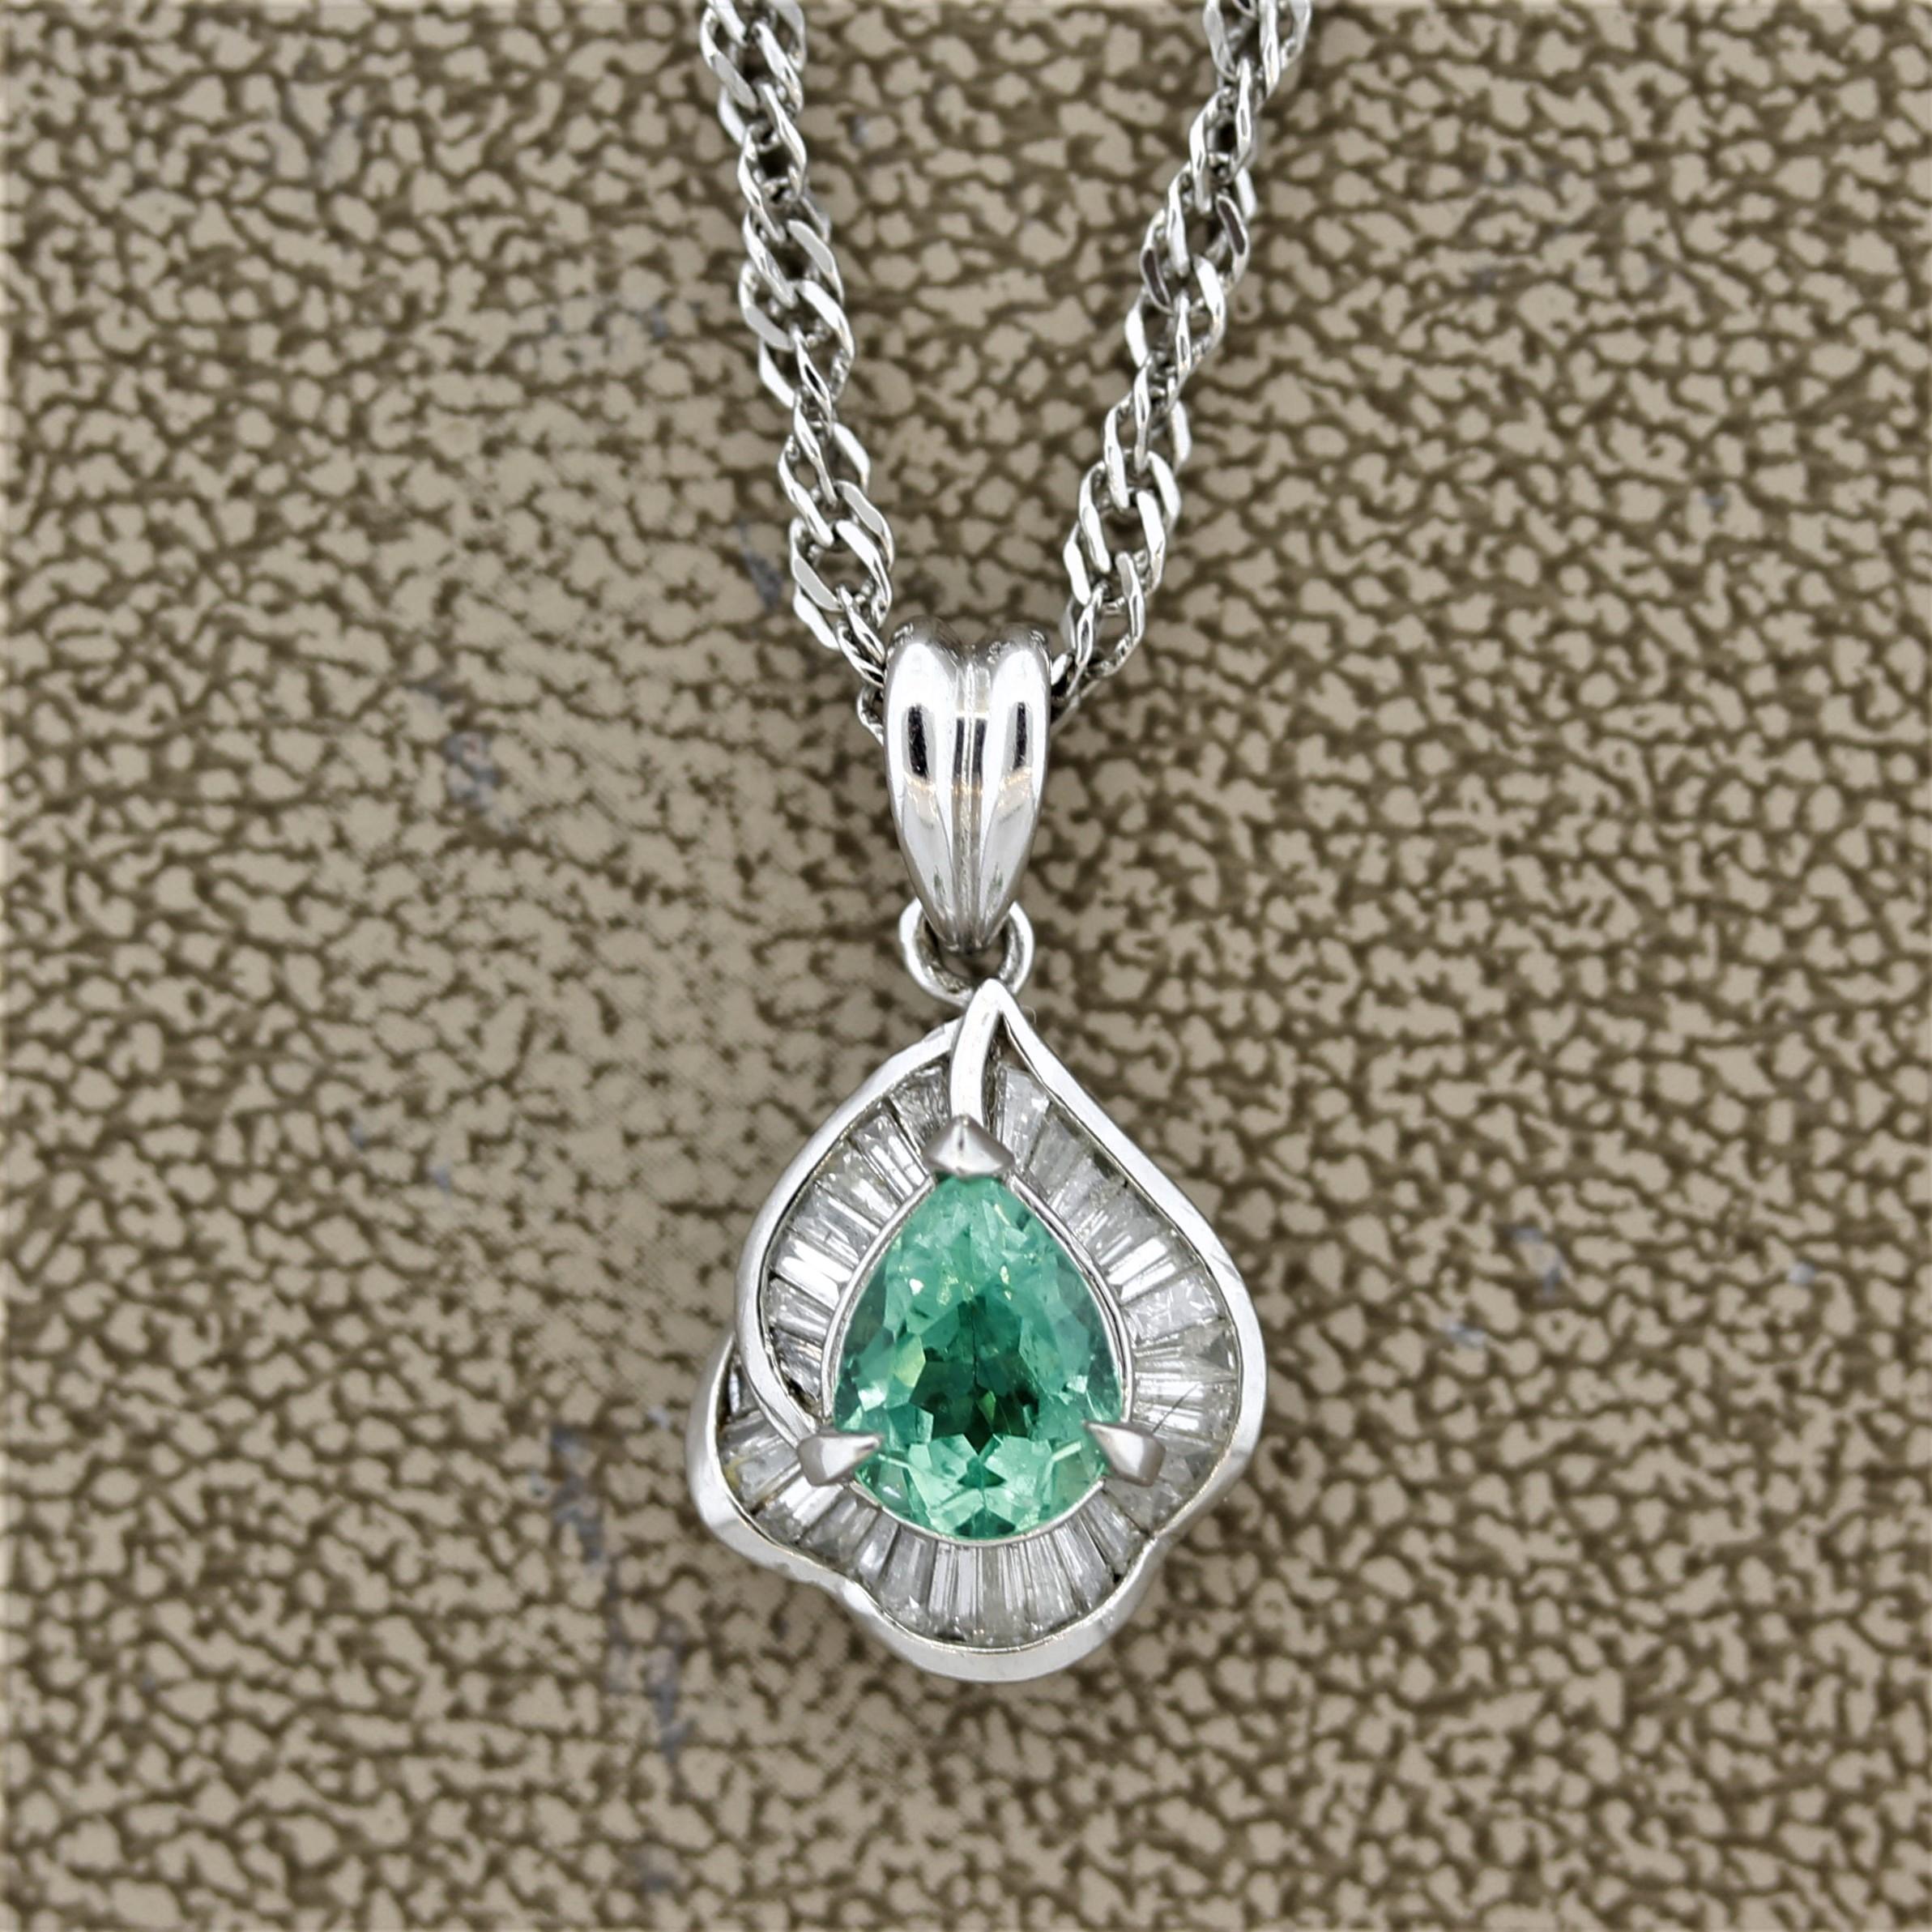 A sweet pendant featuring a 0.88 carat pear shape emerald with a bright green color. It is accented by 0.47 carats of baguette cut diamonds set around the emerald. Hand-fabricated in platinum and ready to be worn!

Pendant Length: 1 inch

Chain